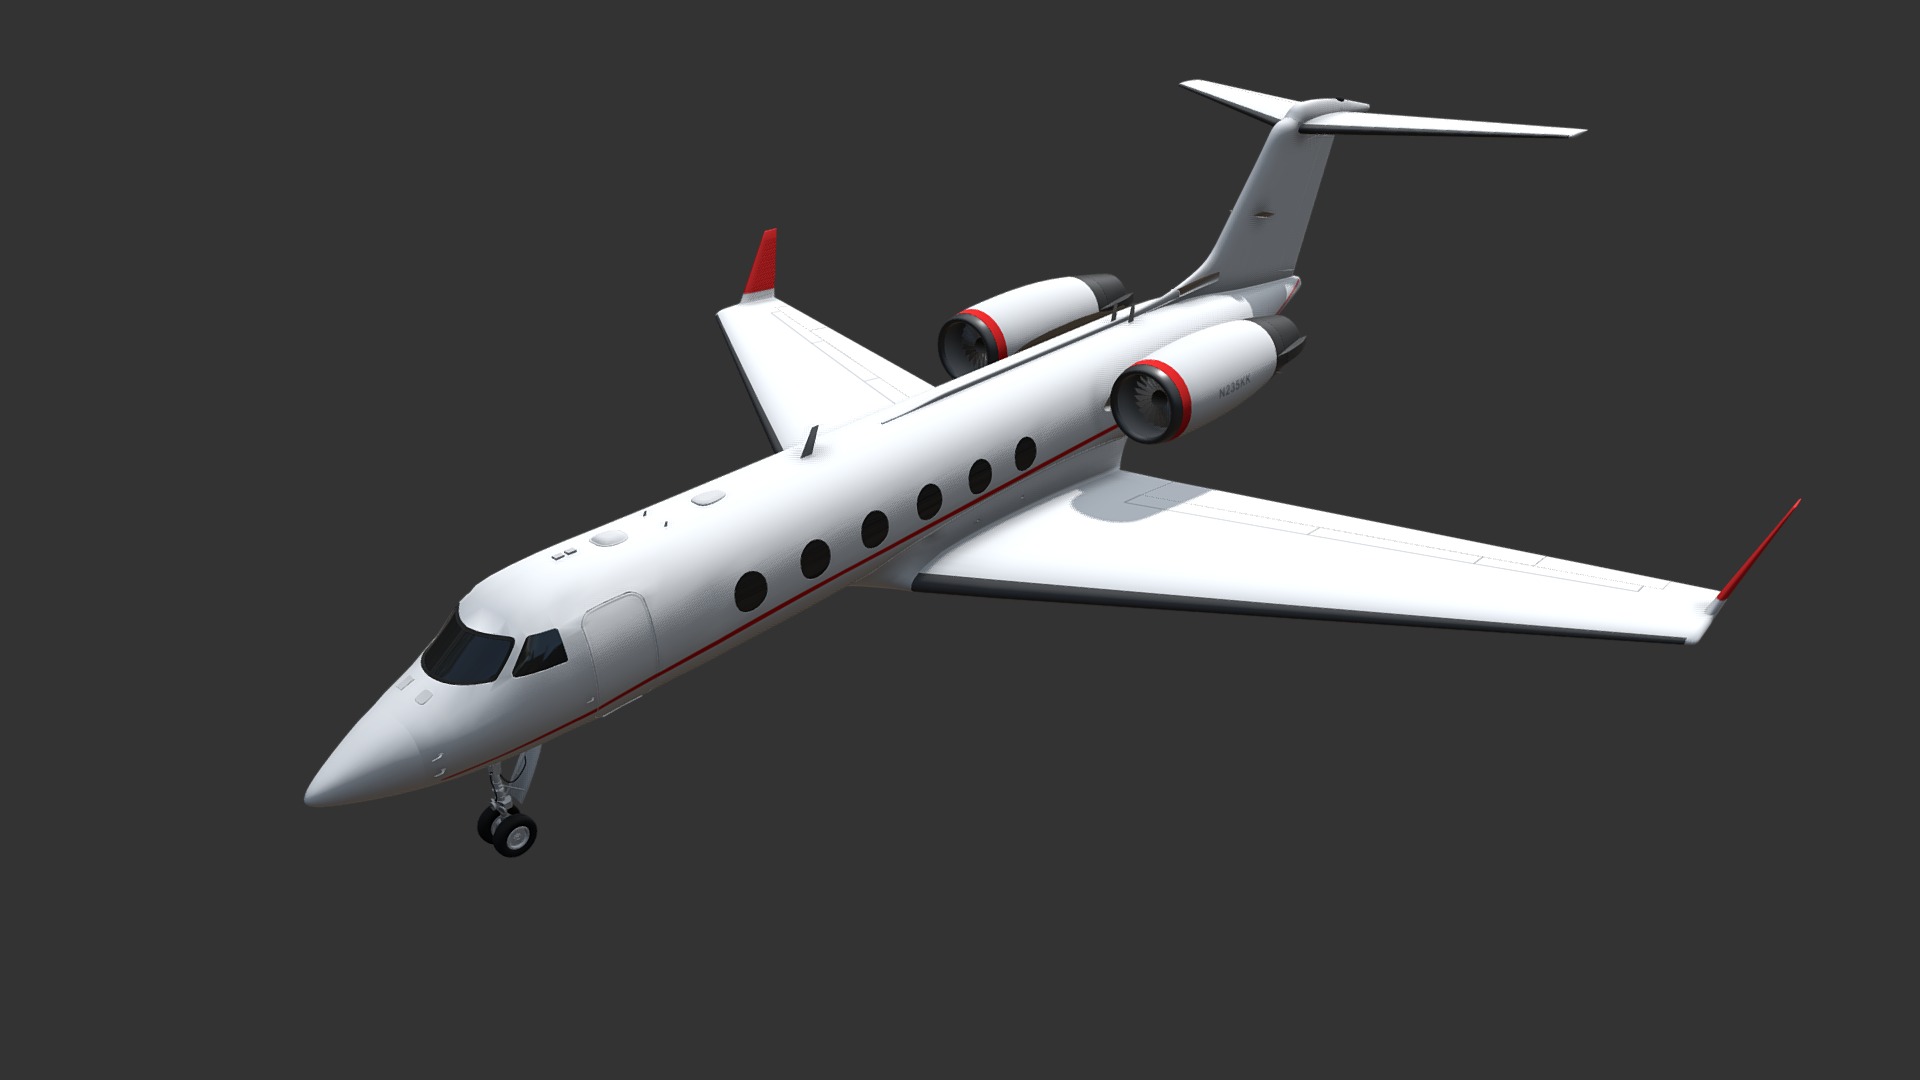 3D model Gulfstream Business Jet - This is a 3D model of the Gulfstream Business Jet. The 3D model is about a white airplane with a red tail.